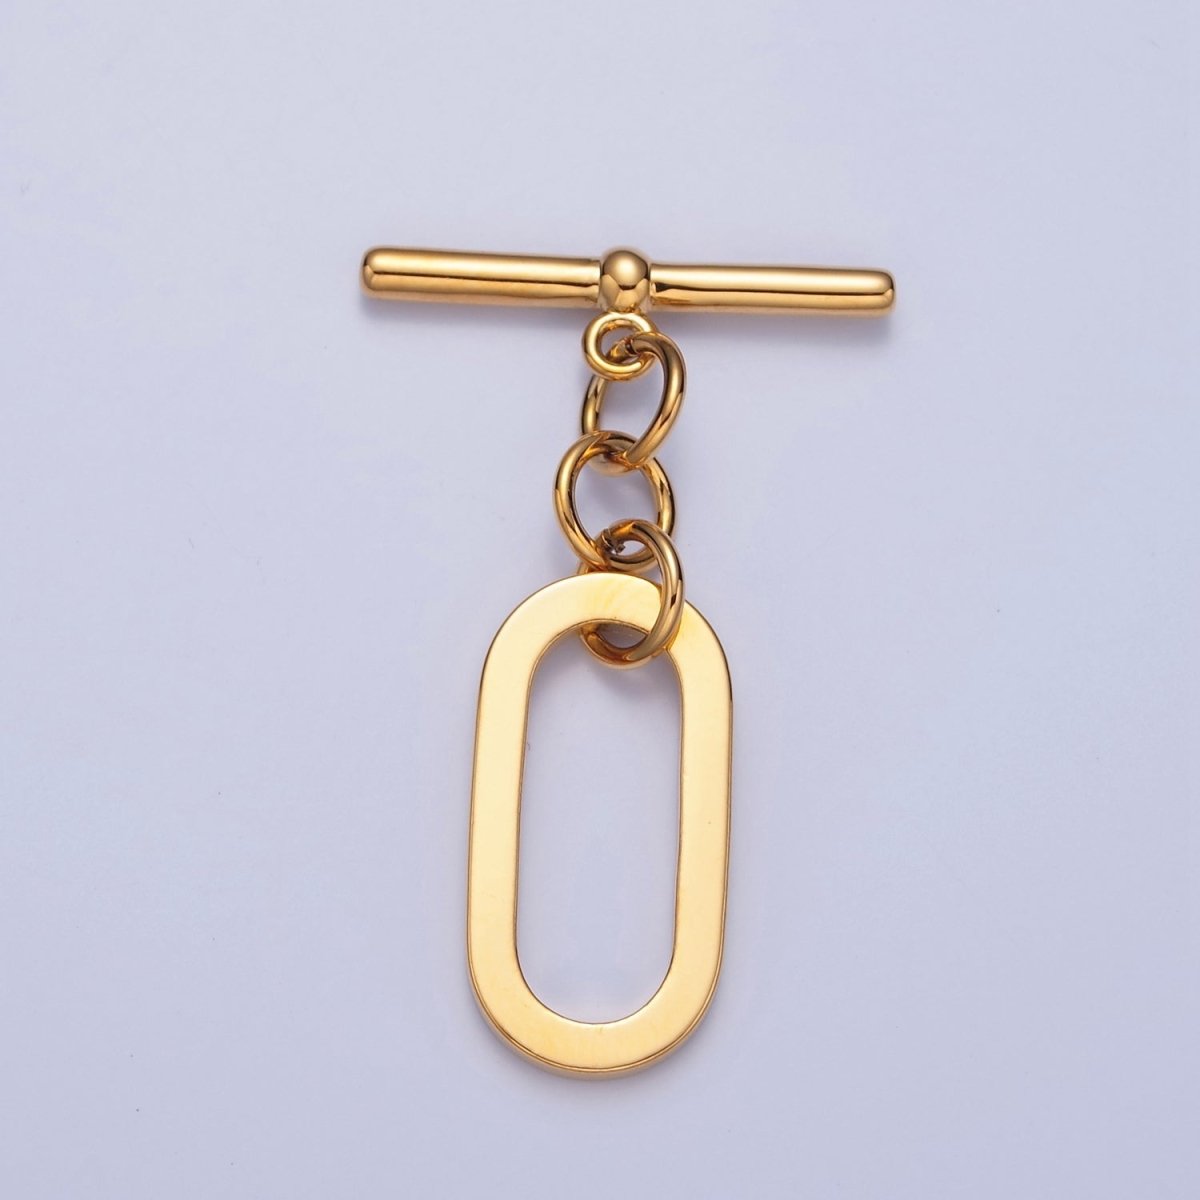 Gold Filled Rectangular Long Oval Toggle Clasps Closure in Gold & Silver L-747~L-749 - DLUXCA